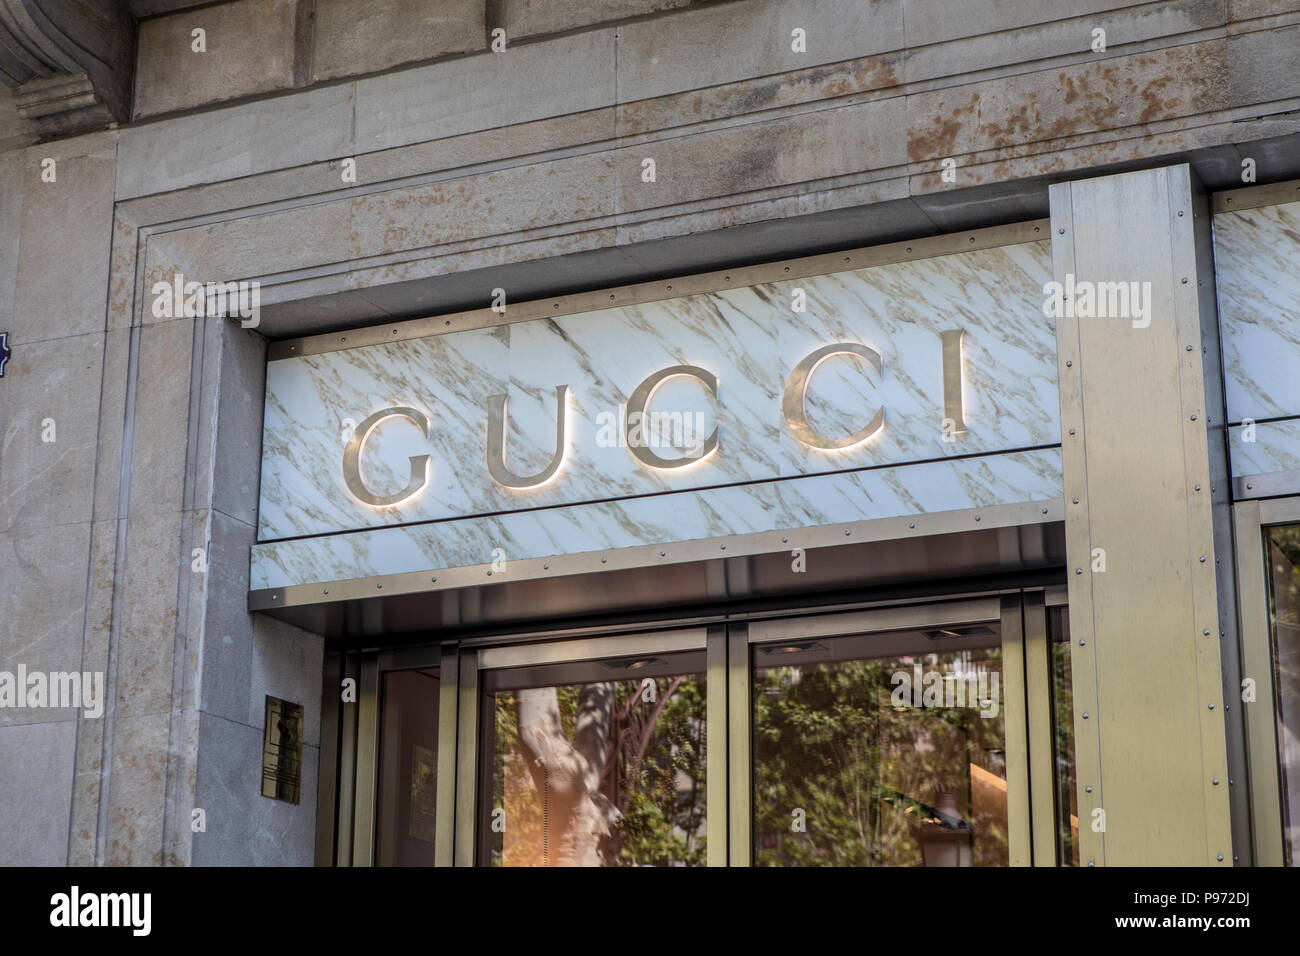 GUCCI sign on Passeig de Gràcia street in Barcelona. Barcelona is a city in Spain. It is the capital and largest city of Catalonia, as well as the most populous municipality